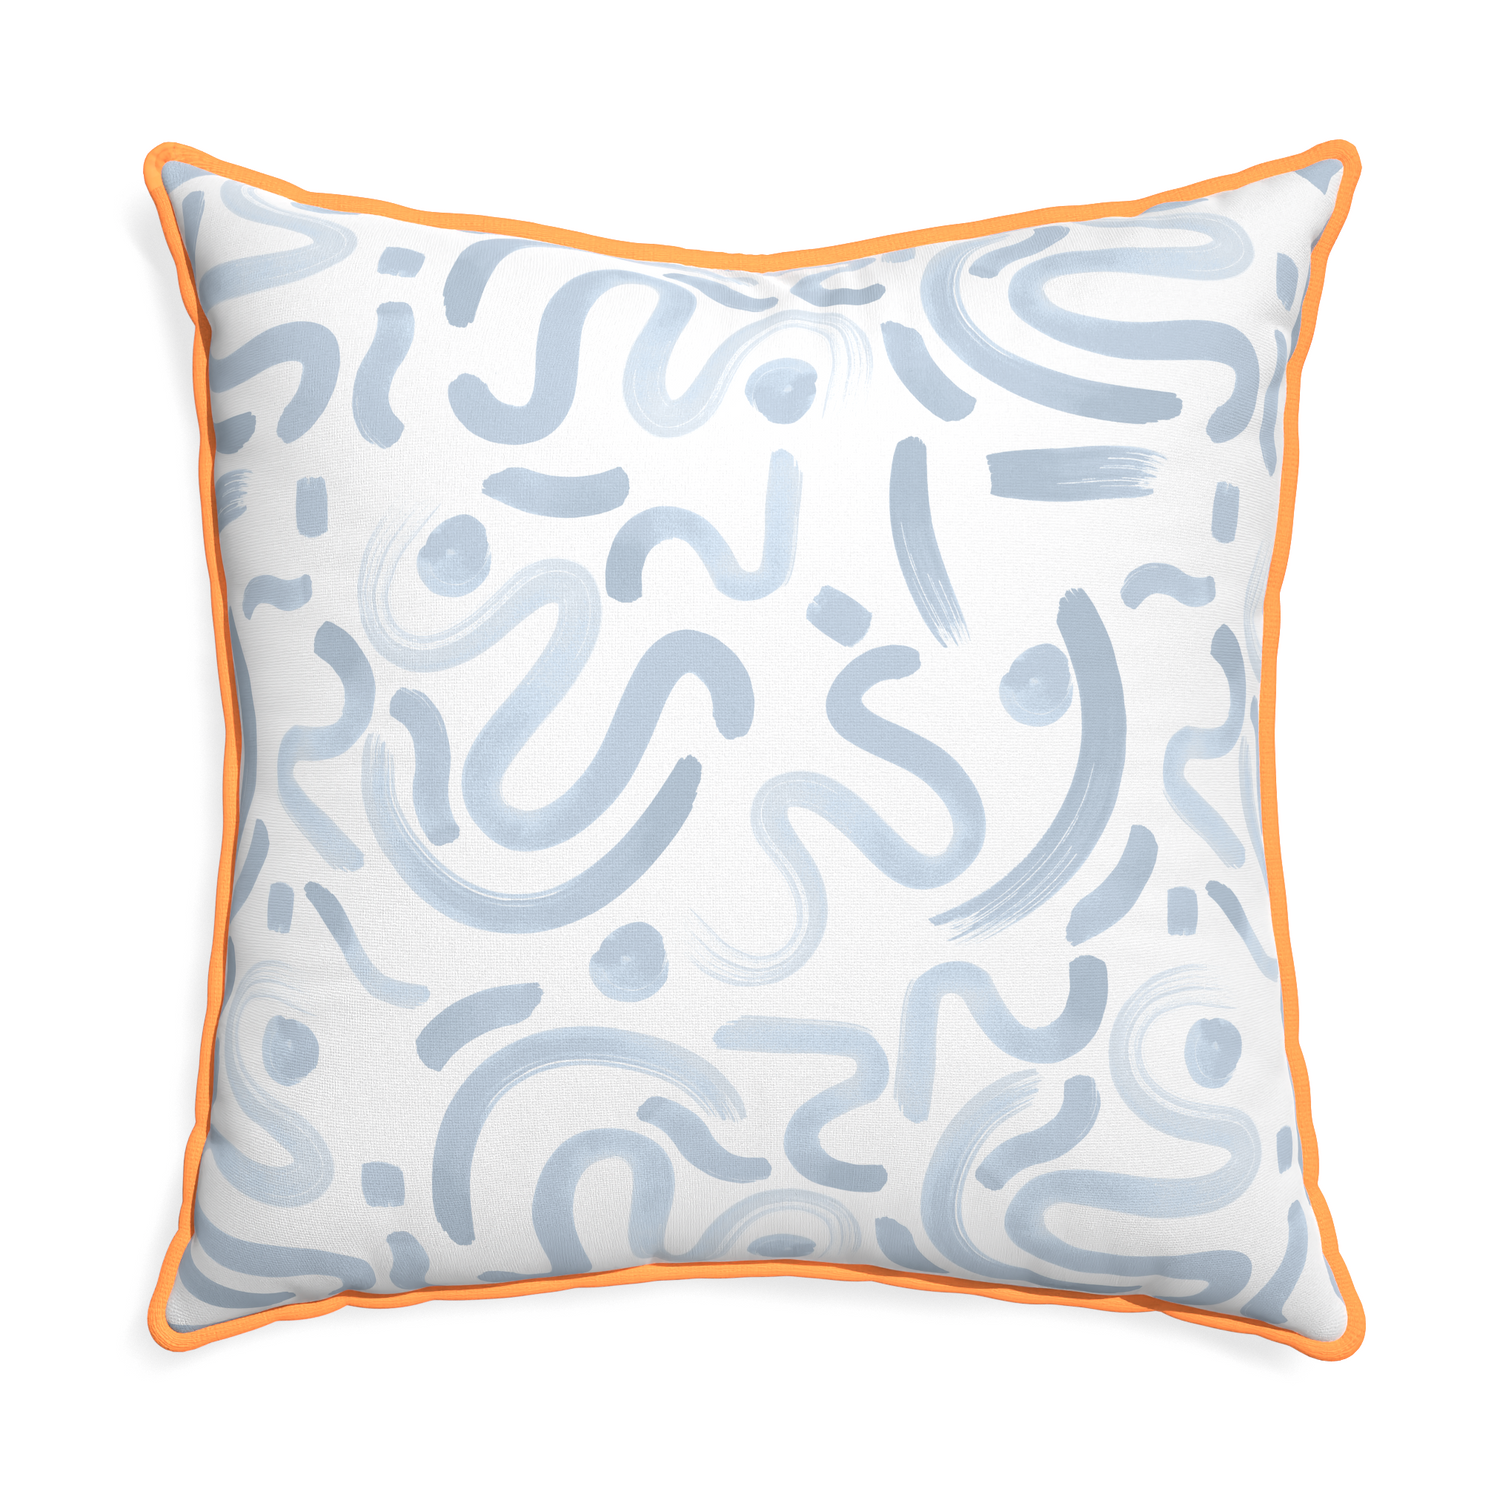 Euro-sham hockney sky custom pillow with clementine piping on white background